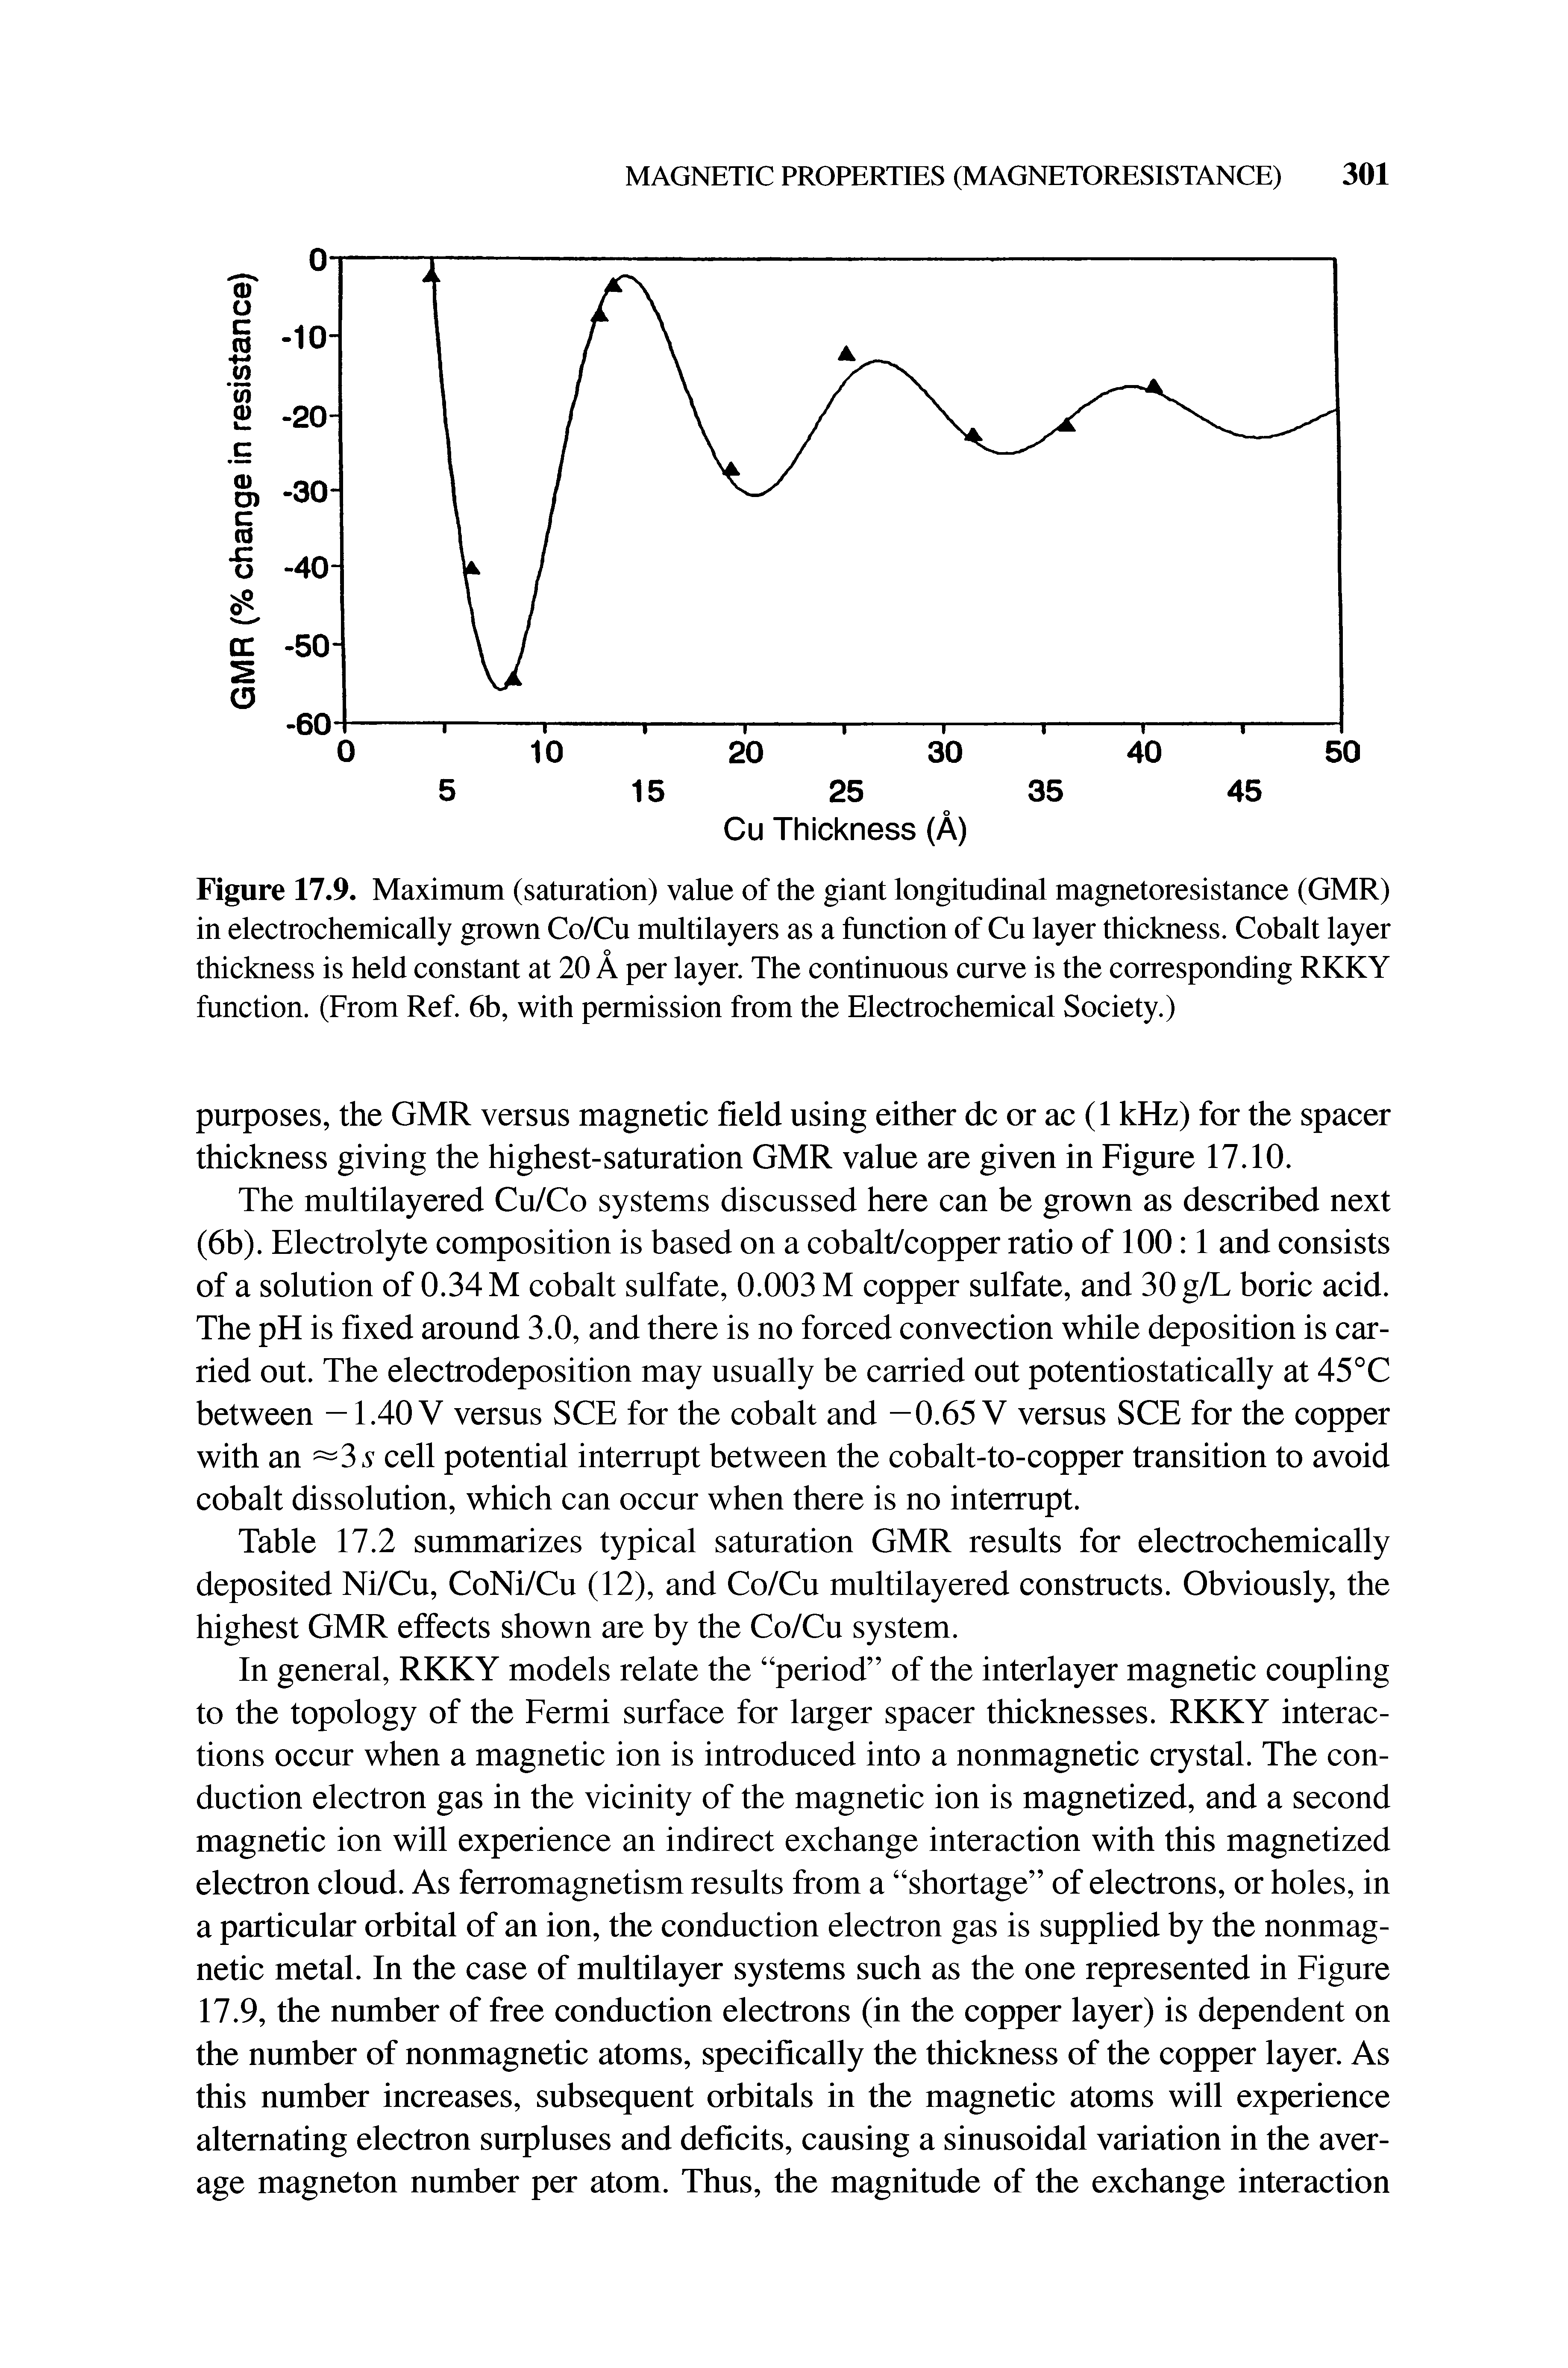 Figure 17.9. Maximum (saturation) value of the giant longitudinal magnetoresistance (GMR) in electrochemically grown Co/Cu multilayers as a function of Cu layer thickness. Cobalt layer thickness is held constant at 20 A per layer. The continuous curve is the corresponding RKKY function. (From Ref. 6b, with permission from the Electrochemical Society.)...